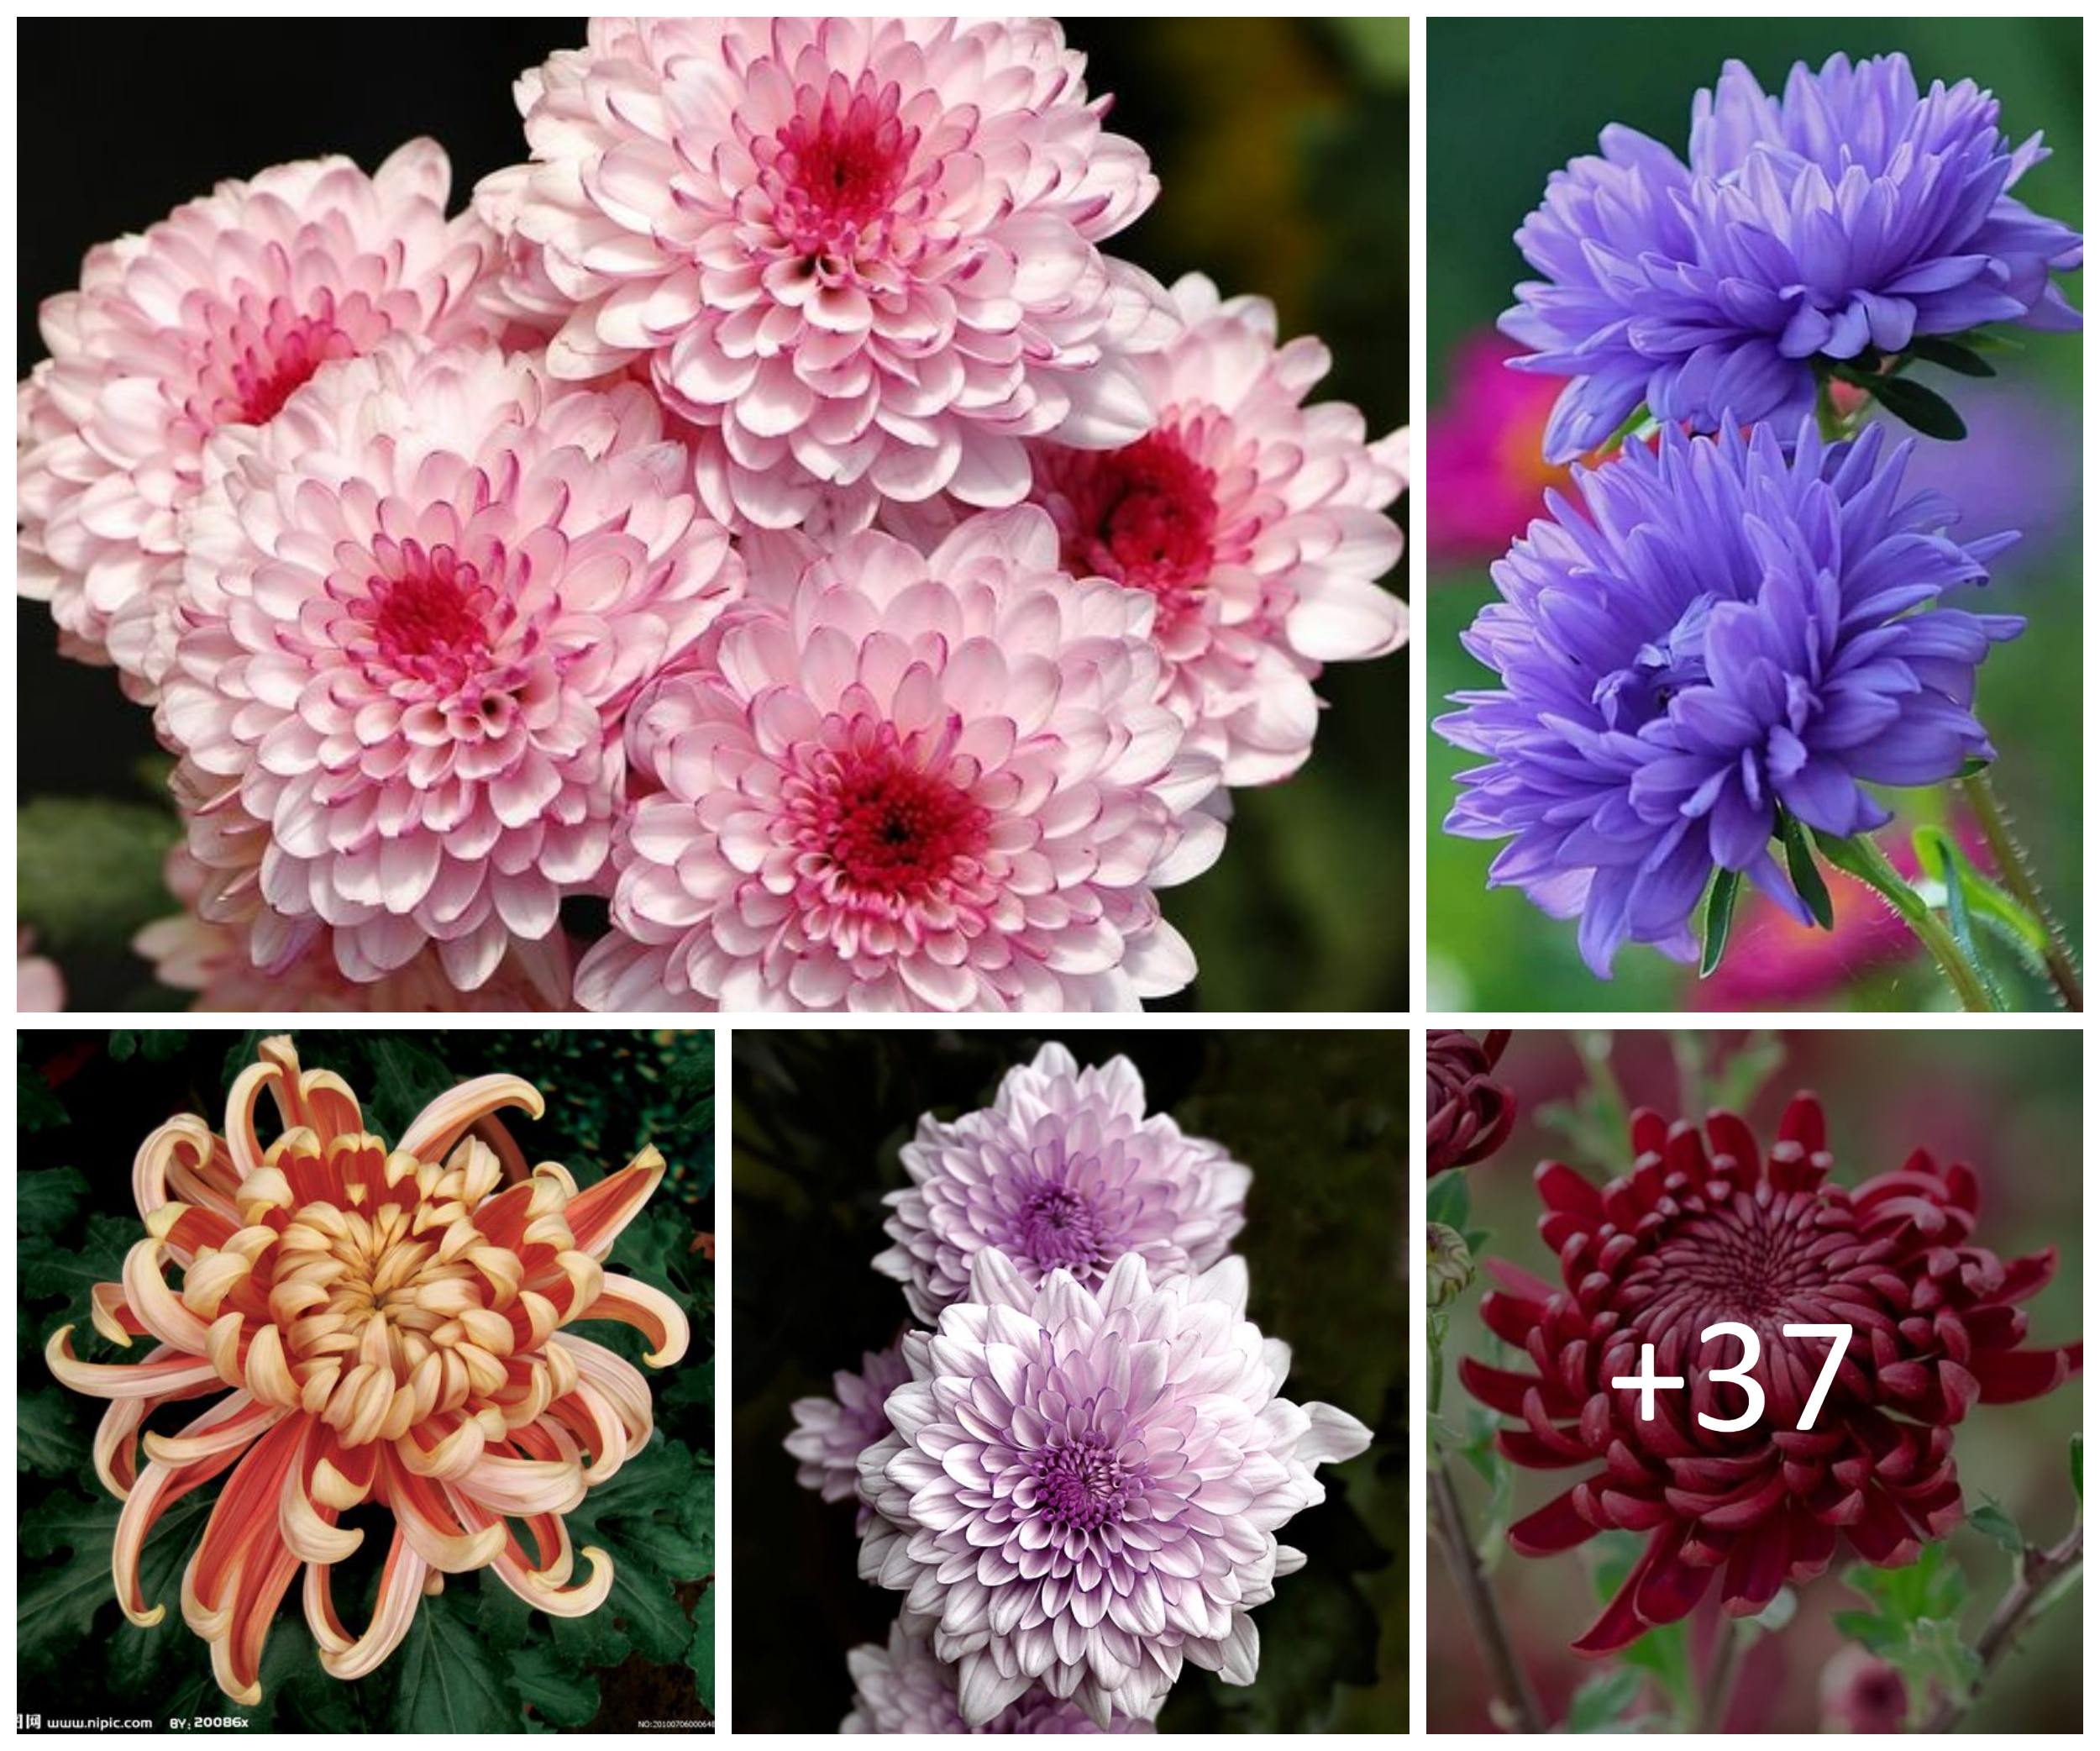 Guide to Selecting, Caring for Chrysanthemums